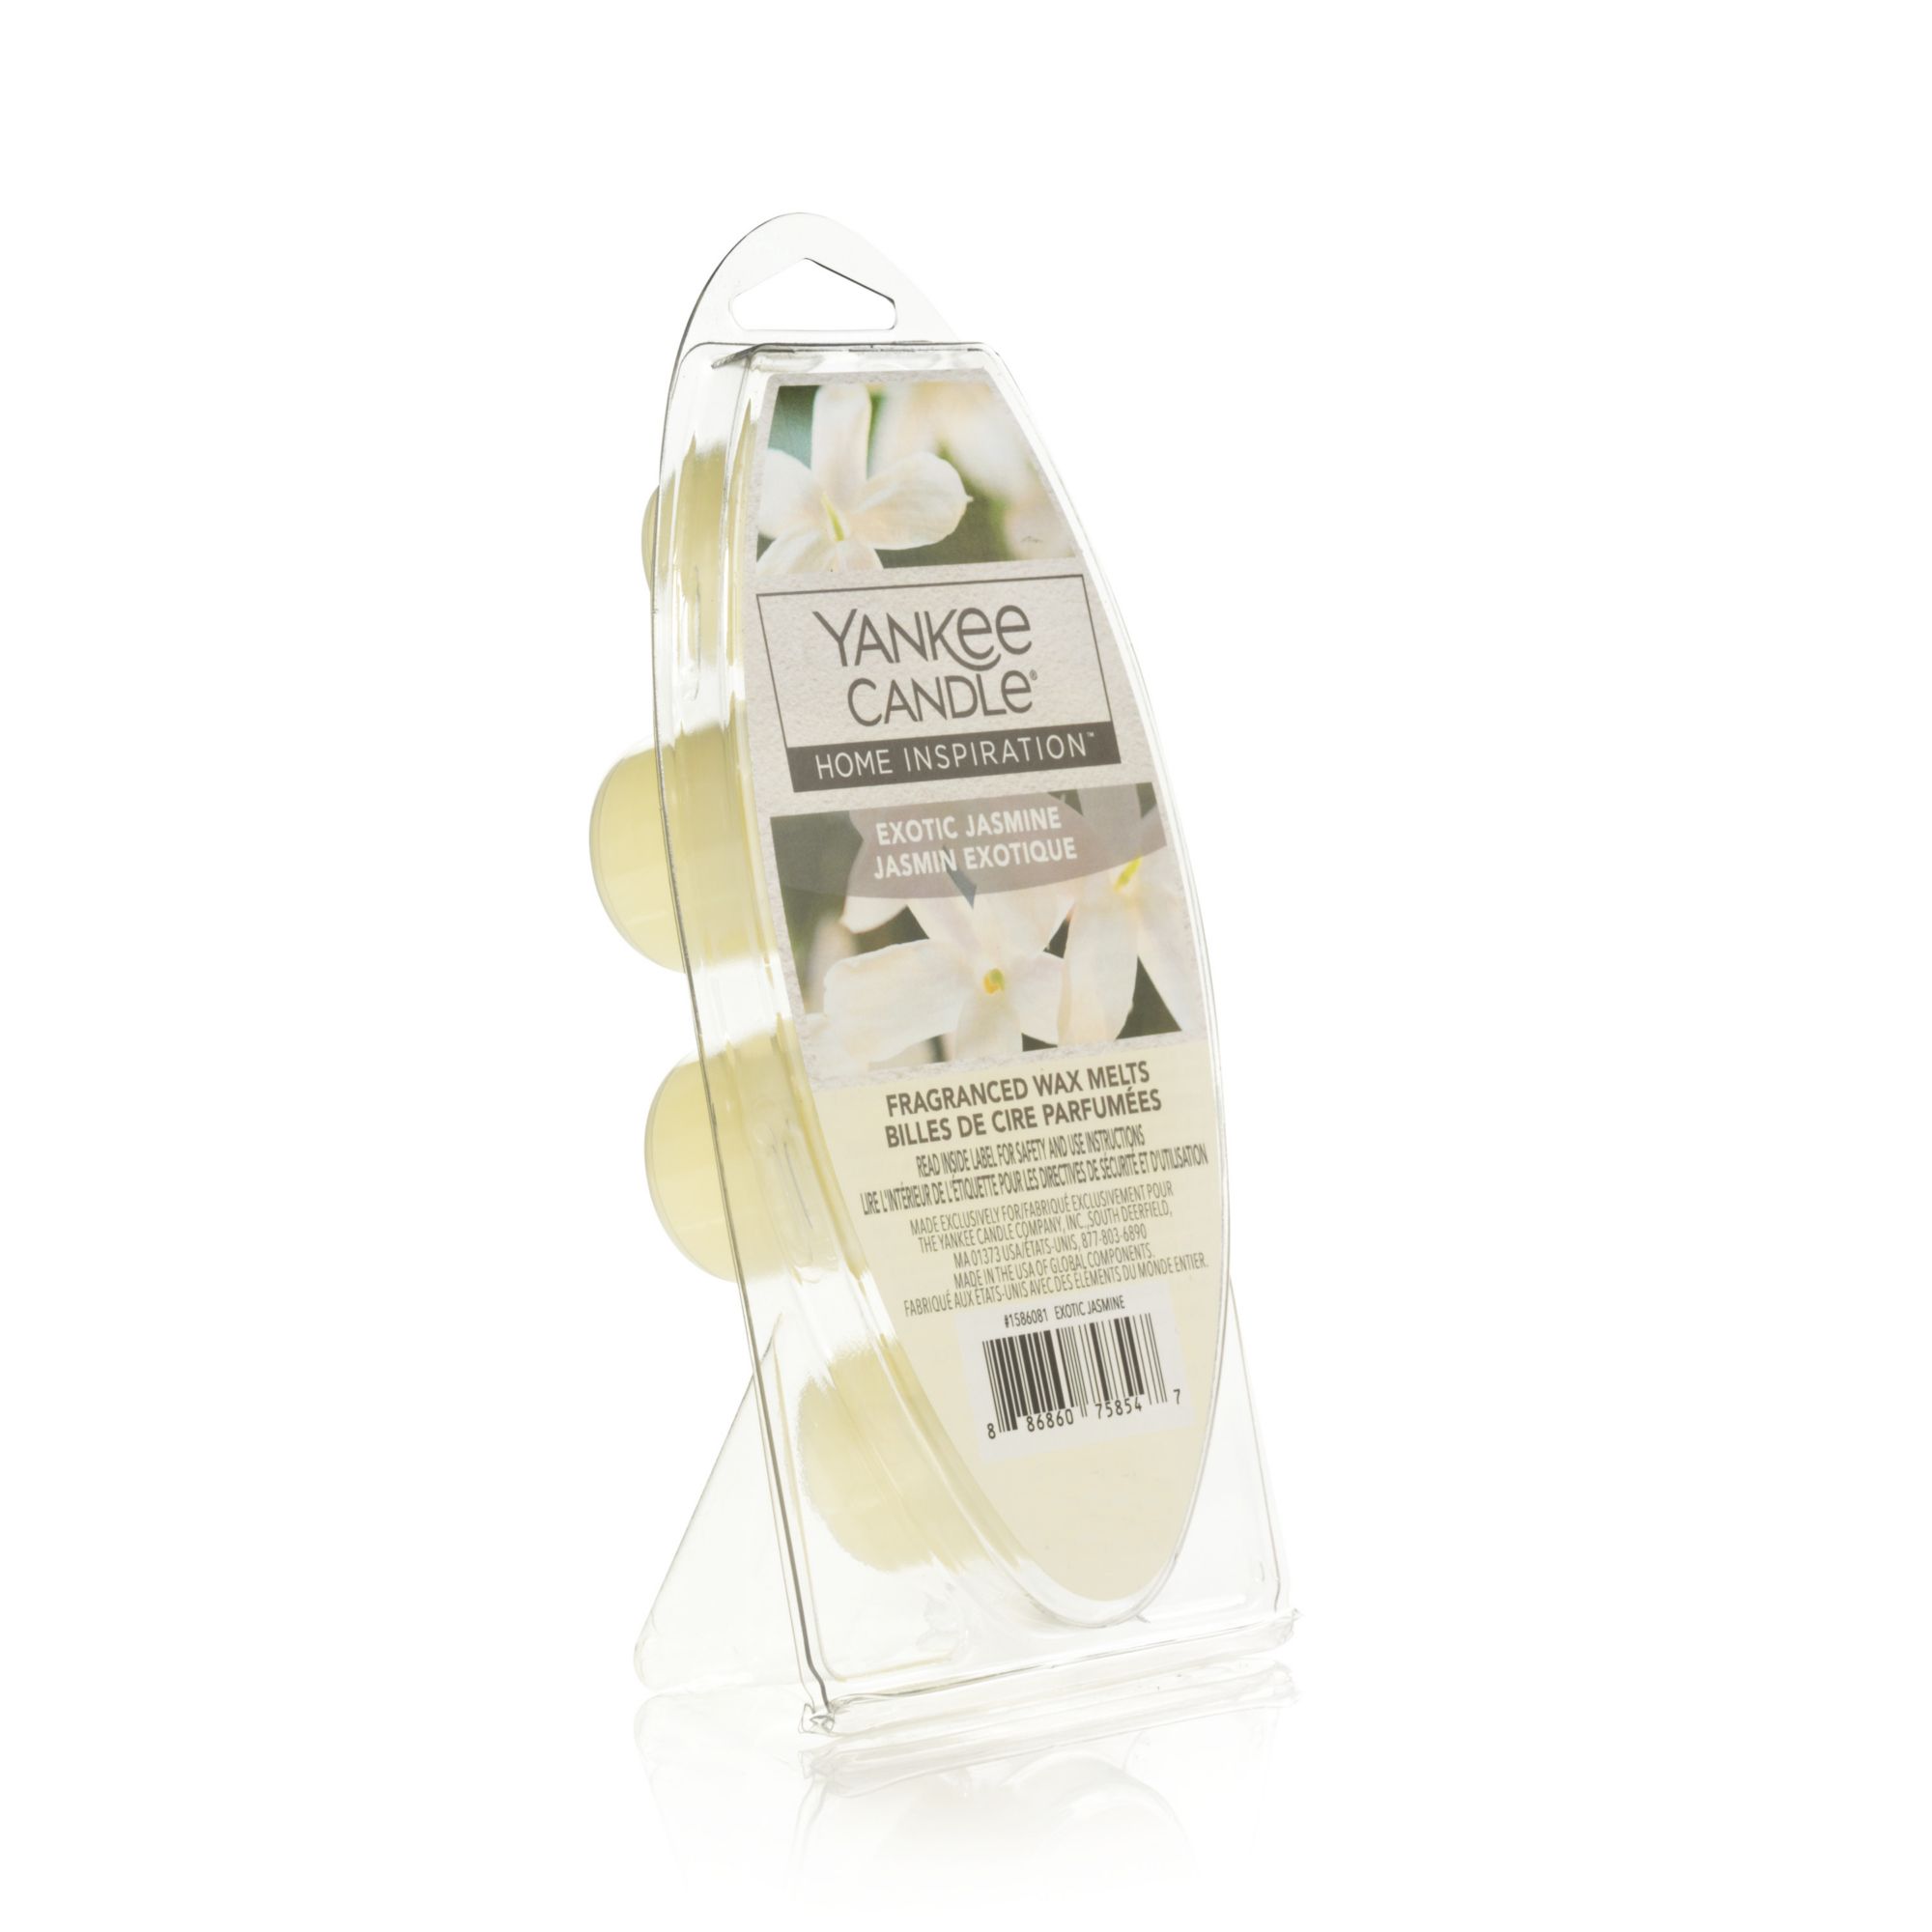 Yankee Candle Fragranced Wax Melts, 6 ct. - Moonlit Night